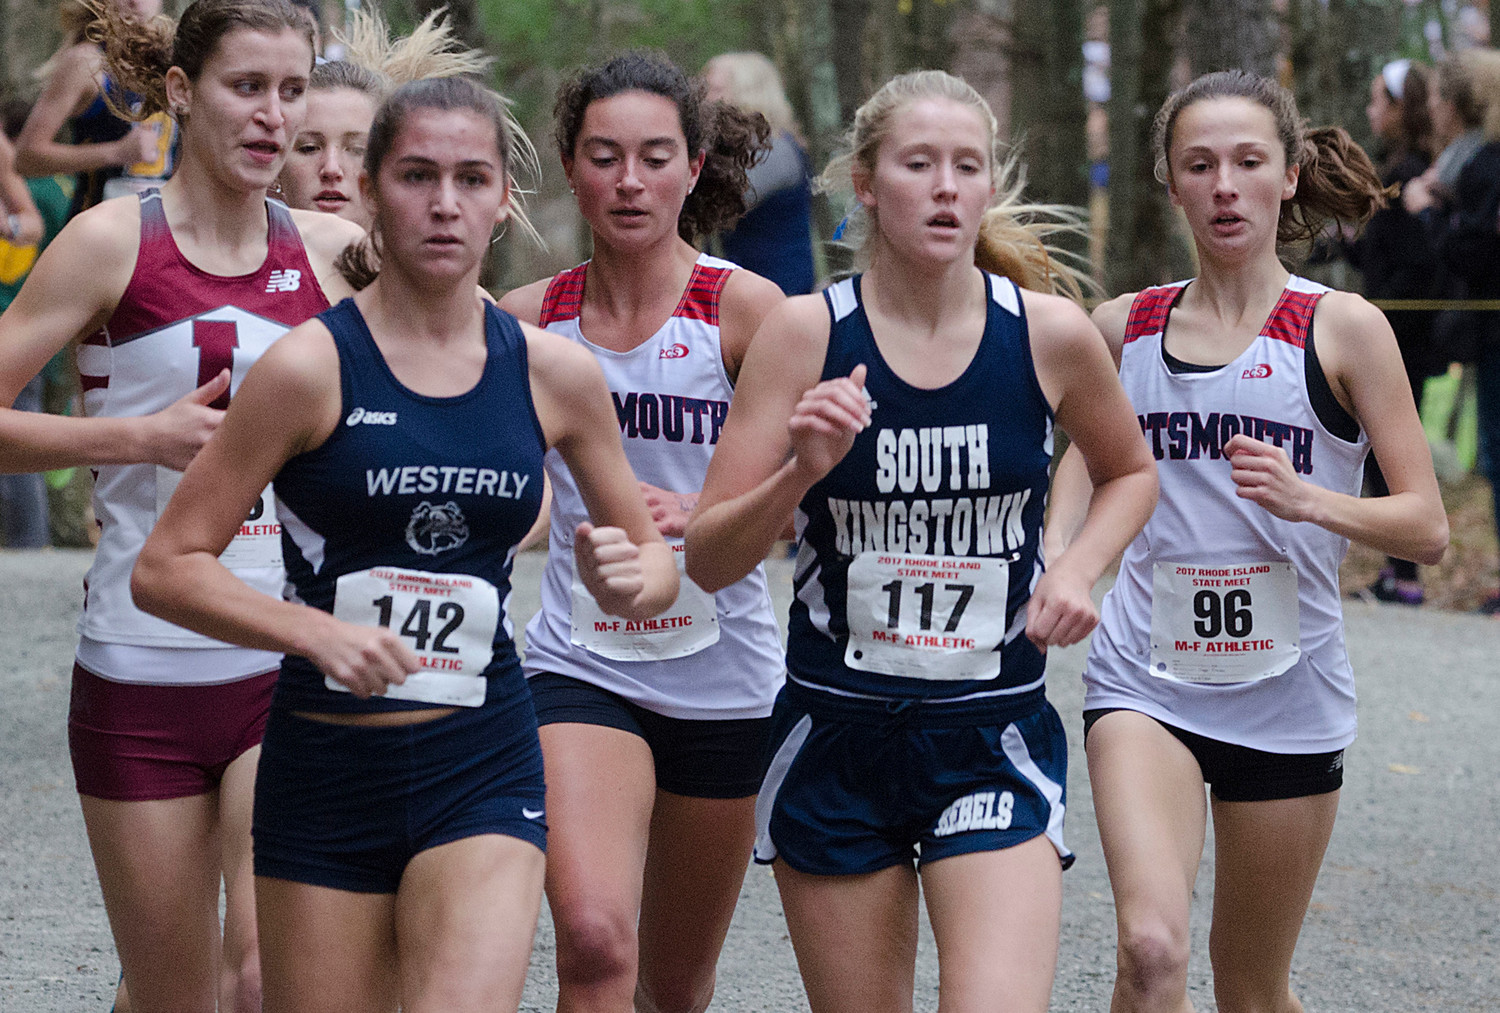 Cross country stars from left, Emily Kane of LaSalle, Randi Burr of Westerly, Elizabeth Sullivan of Portsmouth, Eleanor Lawler of South Kingstown and Nikki Merrill of Portsmouth run in a tight pack on the wooded part of the course at Ponaganset on Sunday.